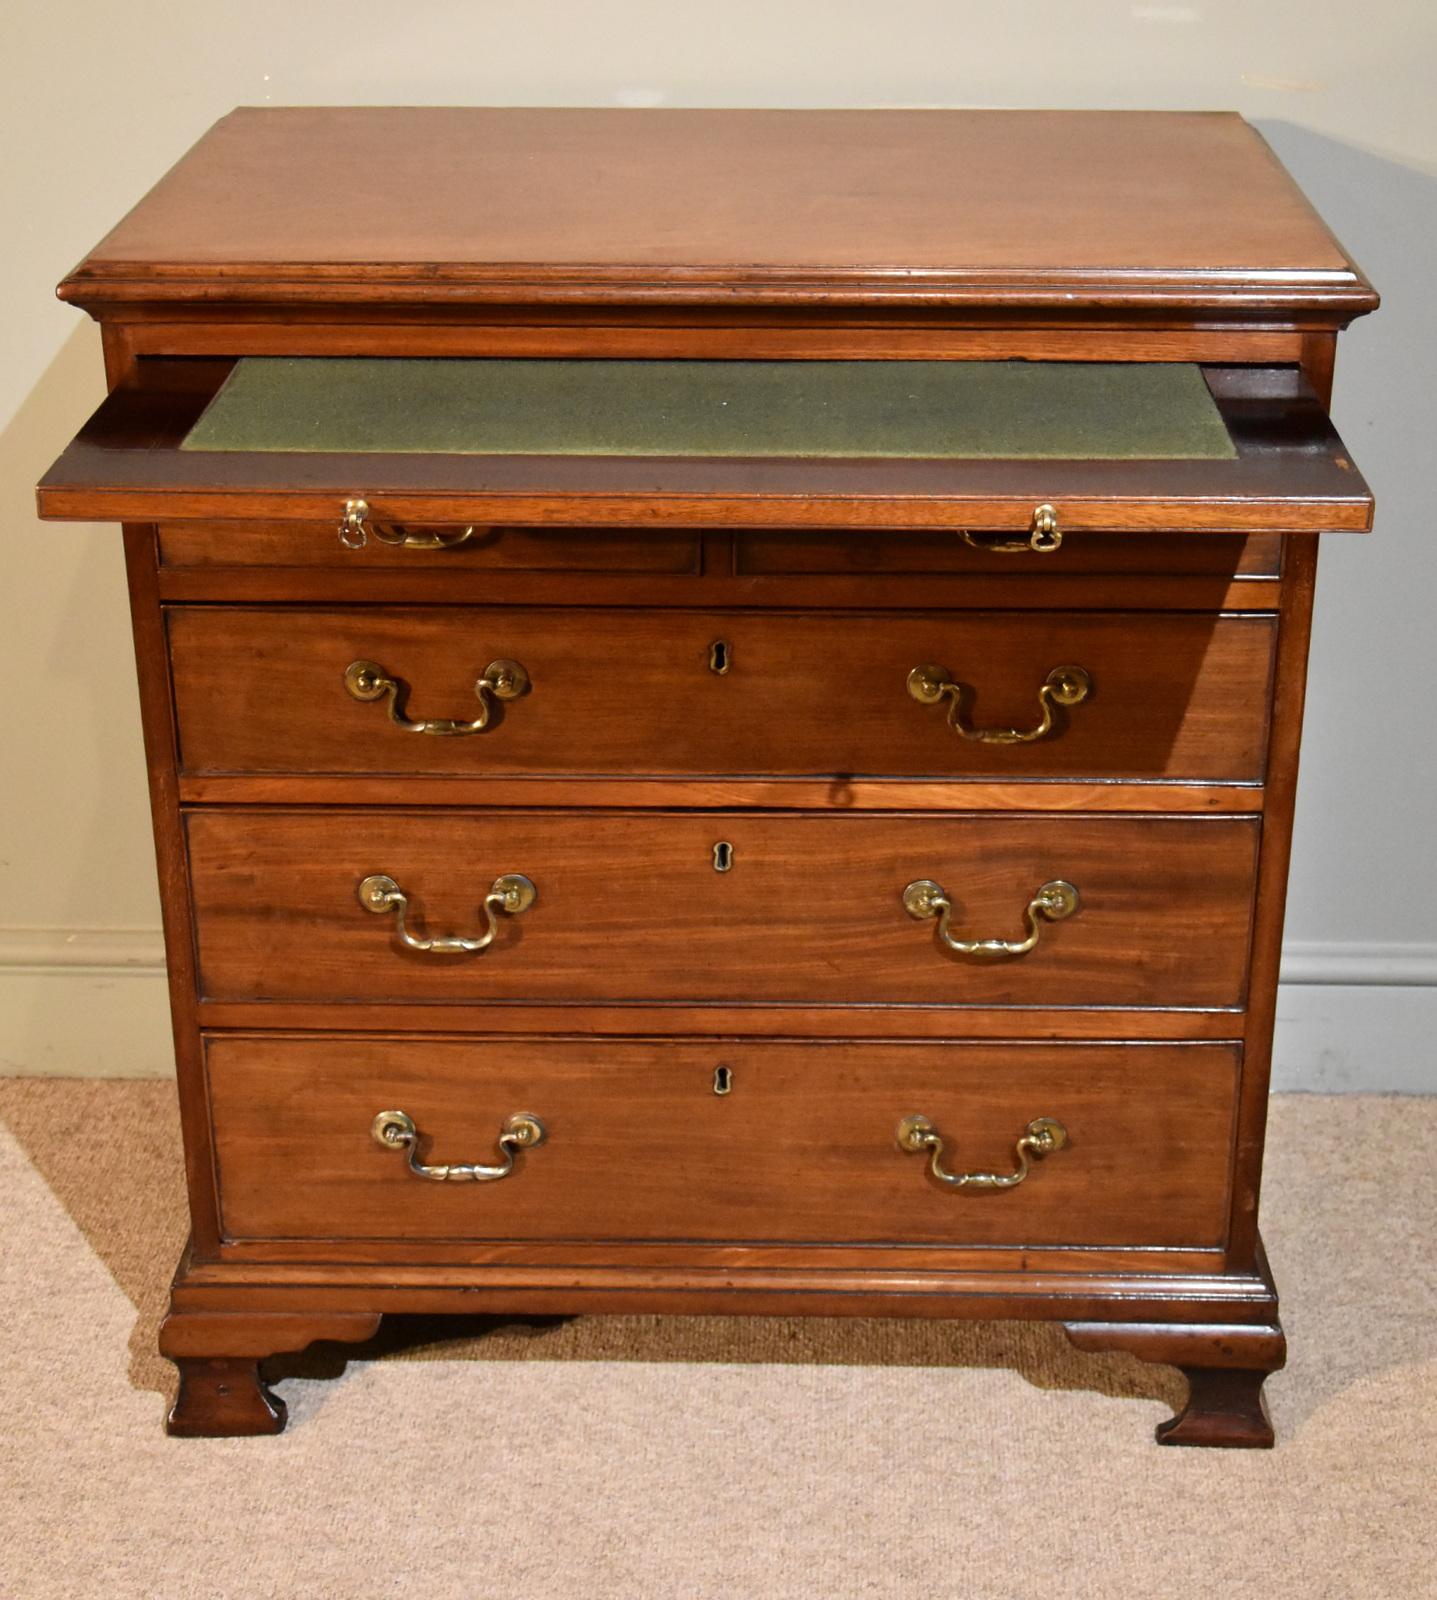 A George III mahogany chest of drawers with brushing slide original swan neck handles on ogee bracket feet small proportions

Dimensions:
Height 35